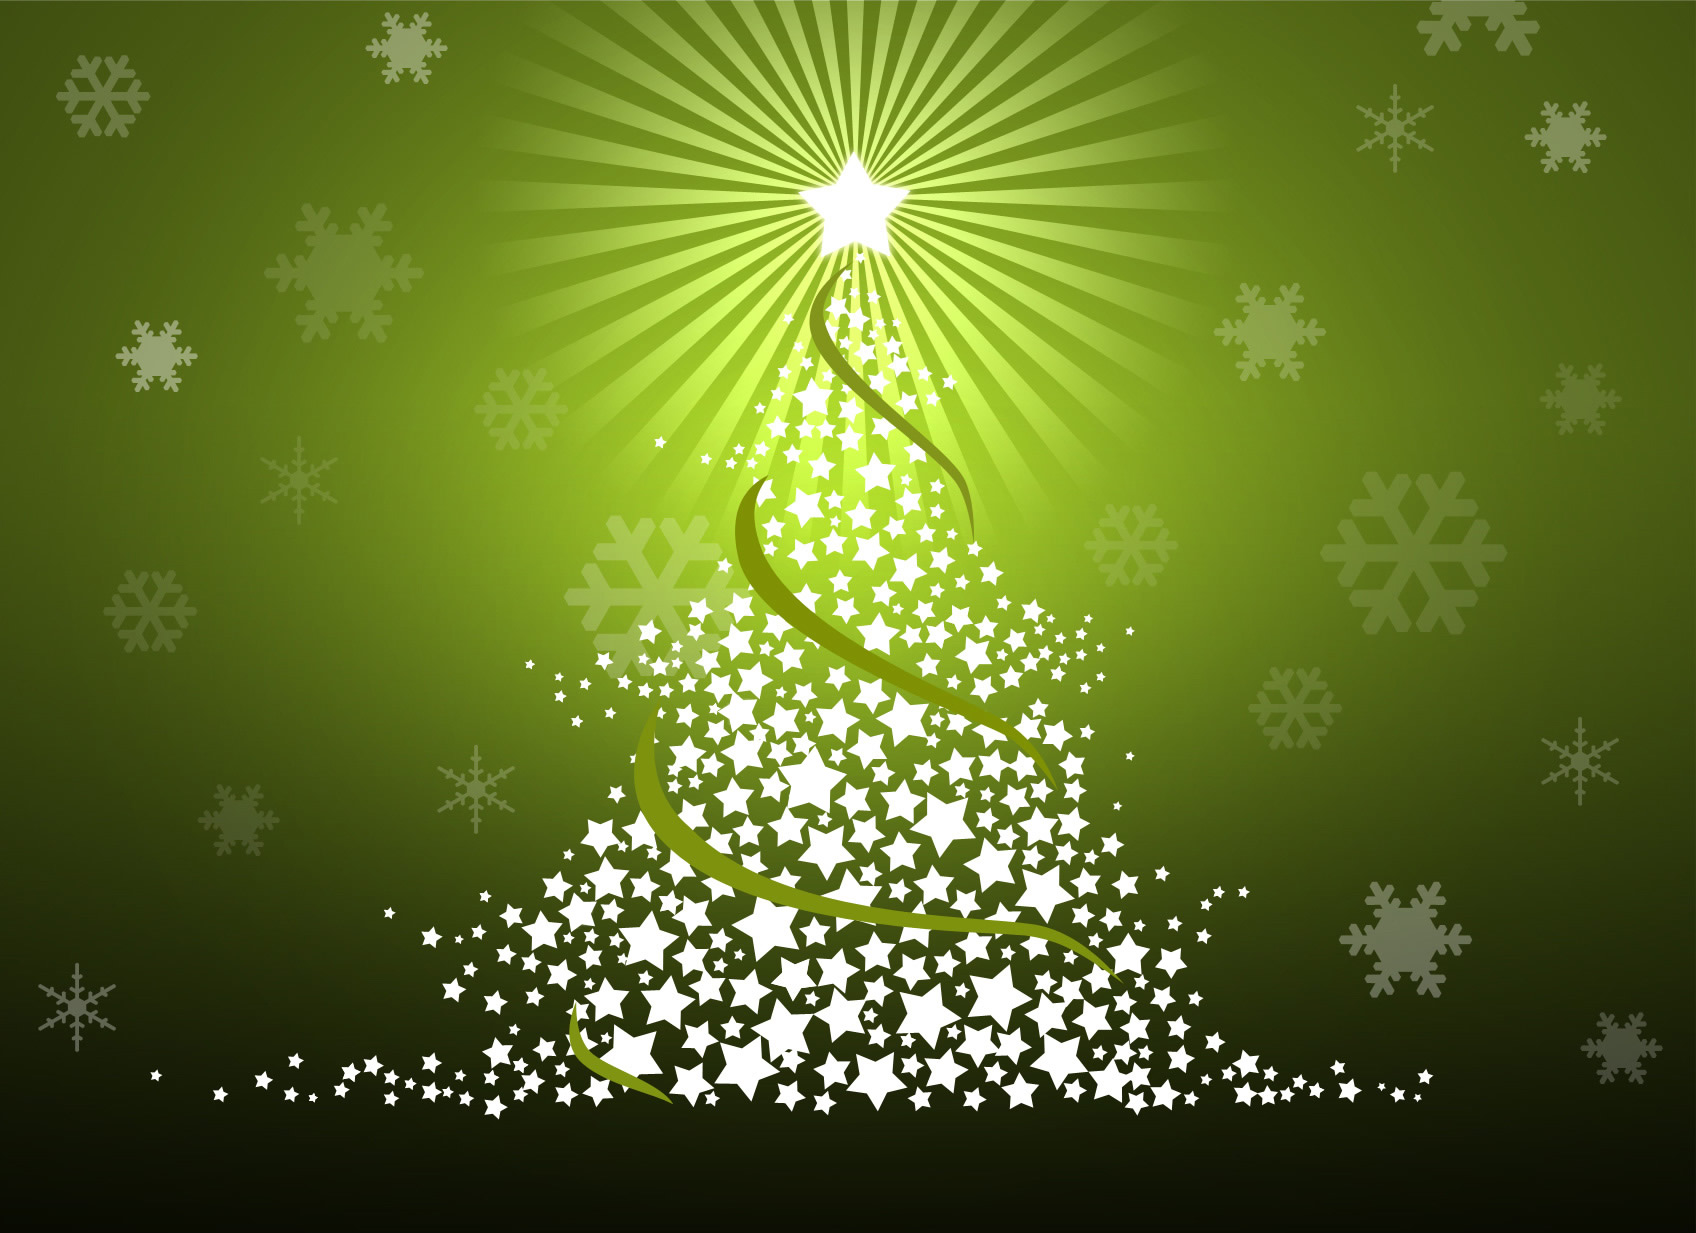  textures, New Year, Christmas texture, Christmas and New Year tree texture background